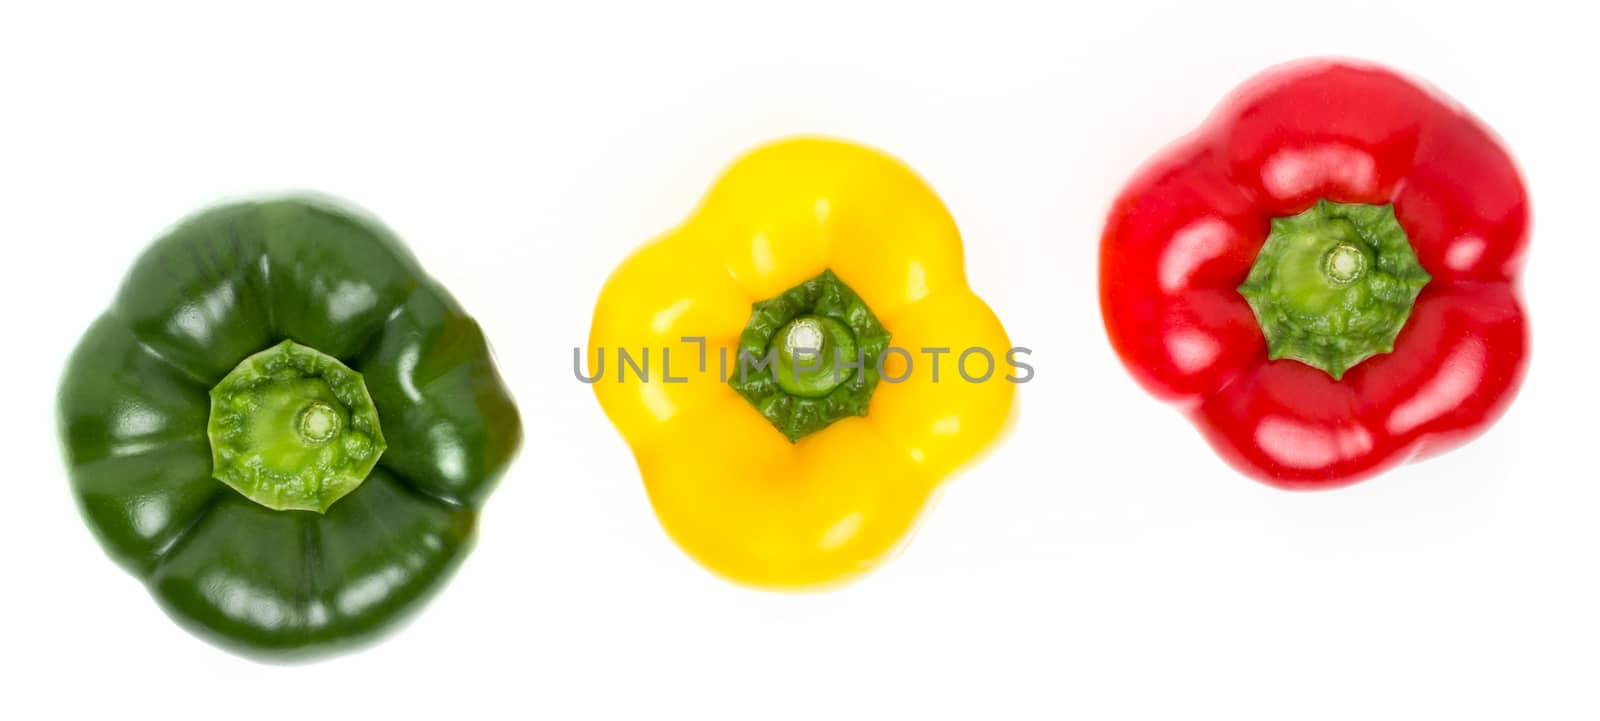 Three peppers of different colors lie in a row on a white backgr by germanopoli